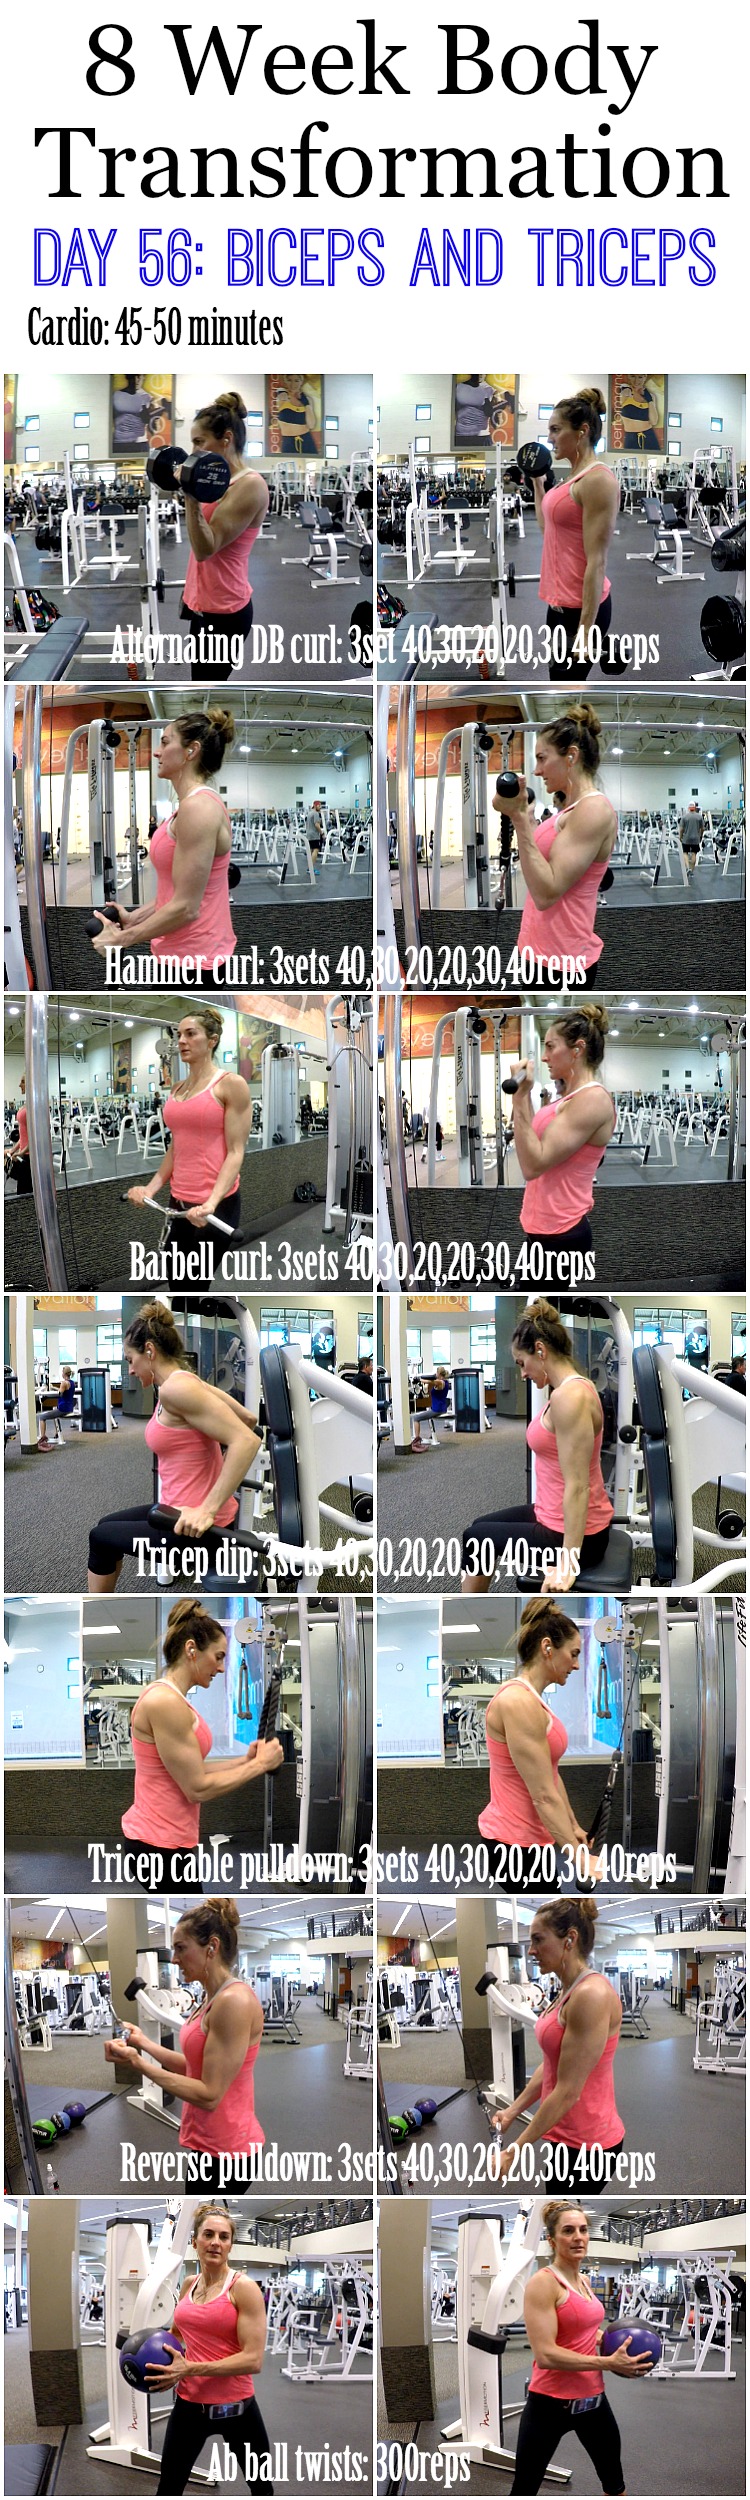 8 Week Body Transformation: Day 56 BICEP and TRICEPS ...